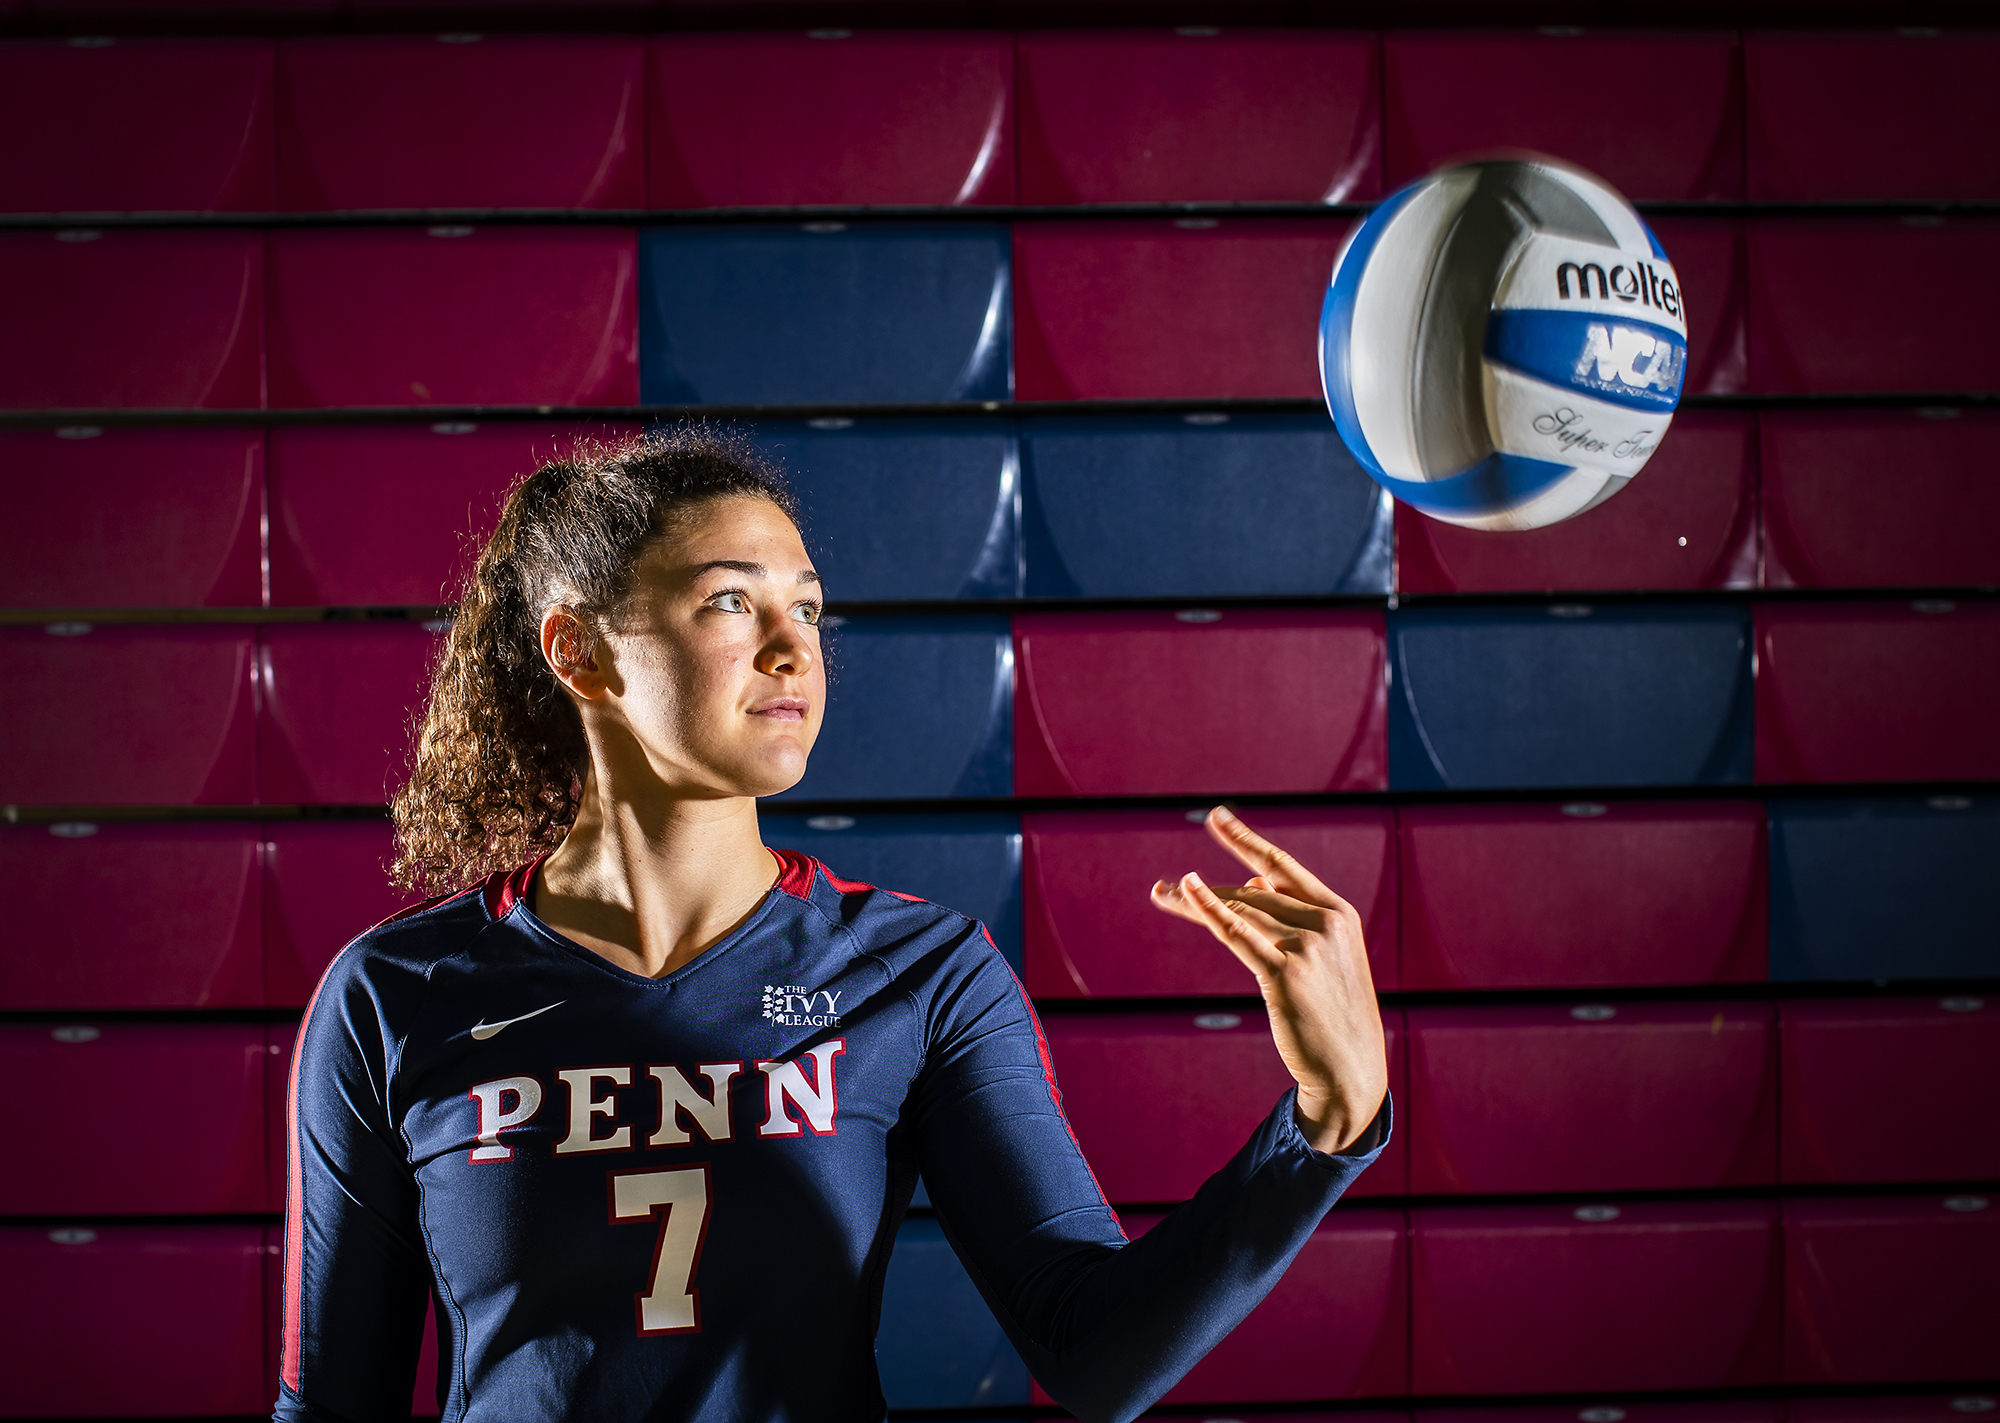 Parker Jones of the volleyball team tosses a ball in the air at the Palestra.